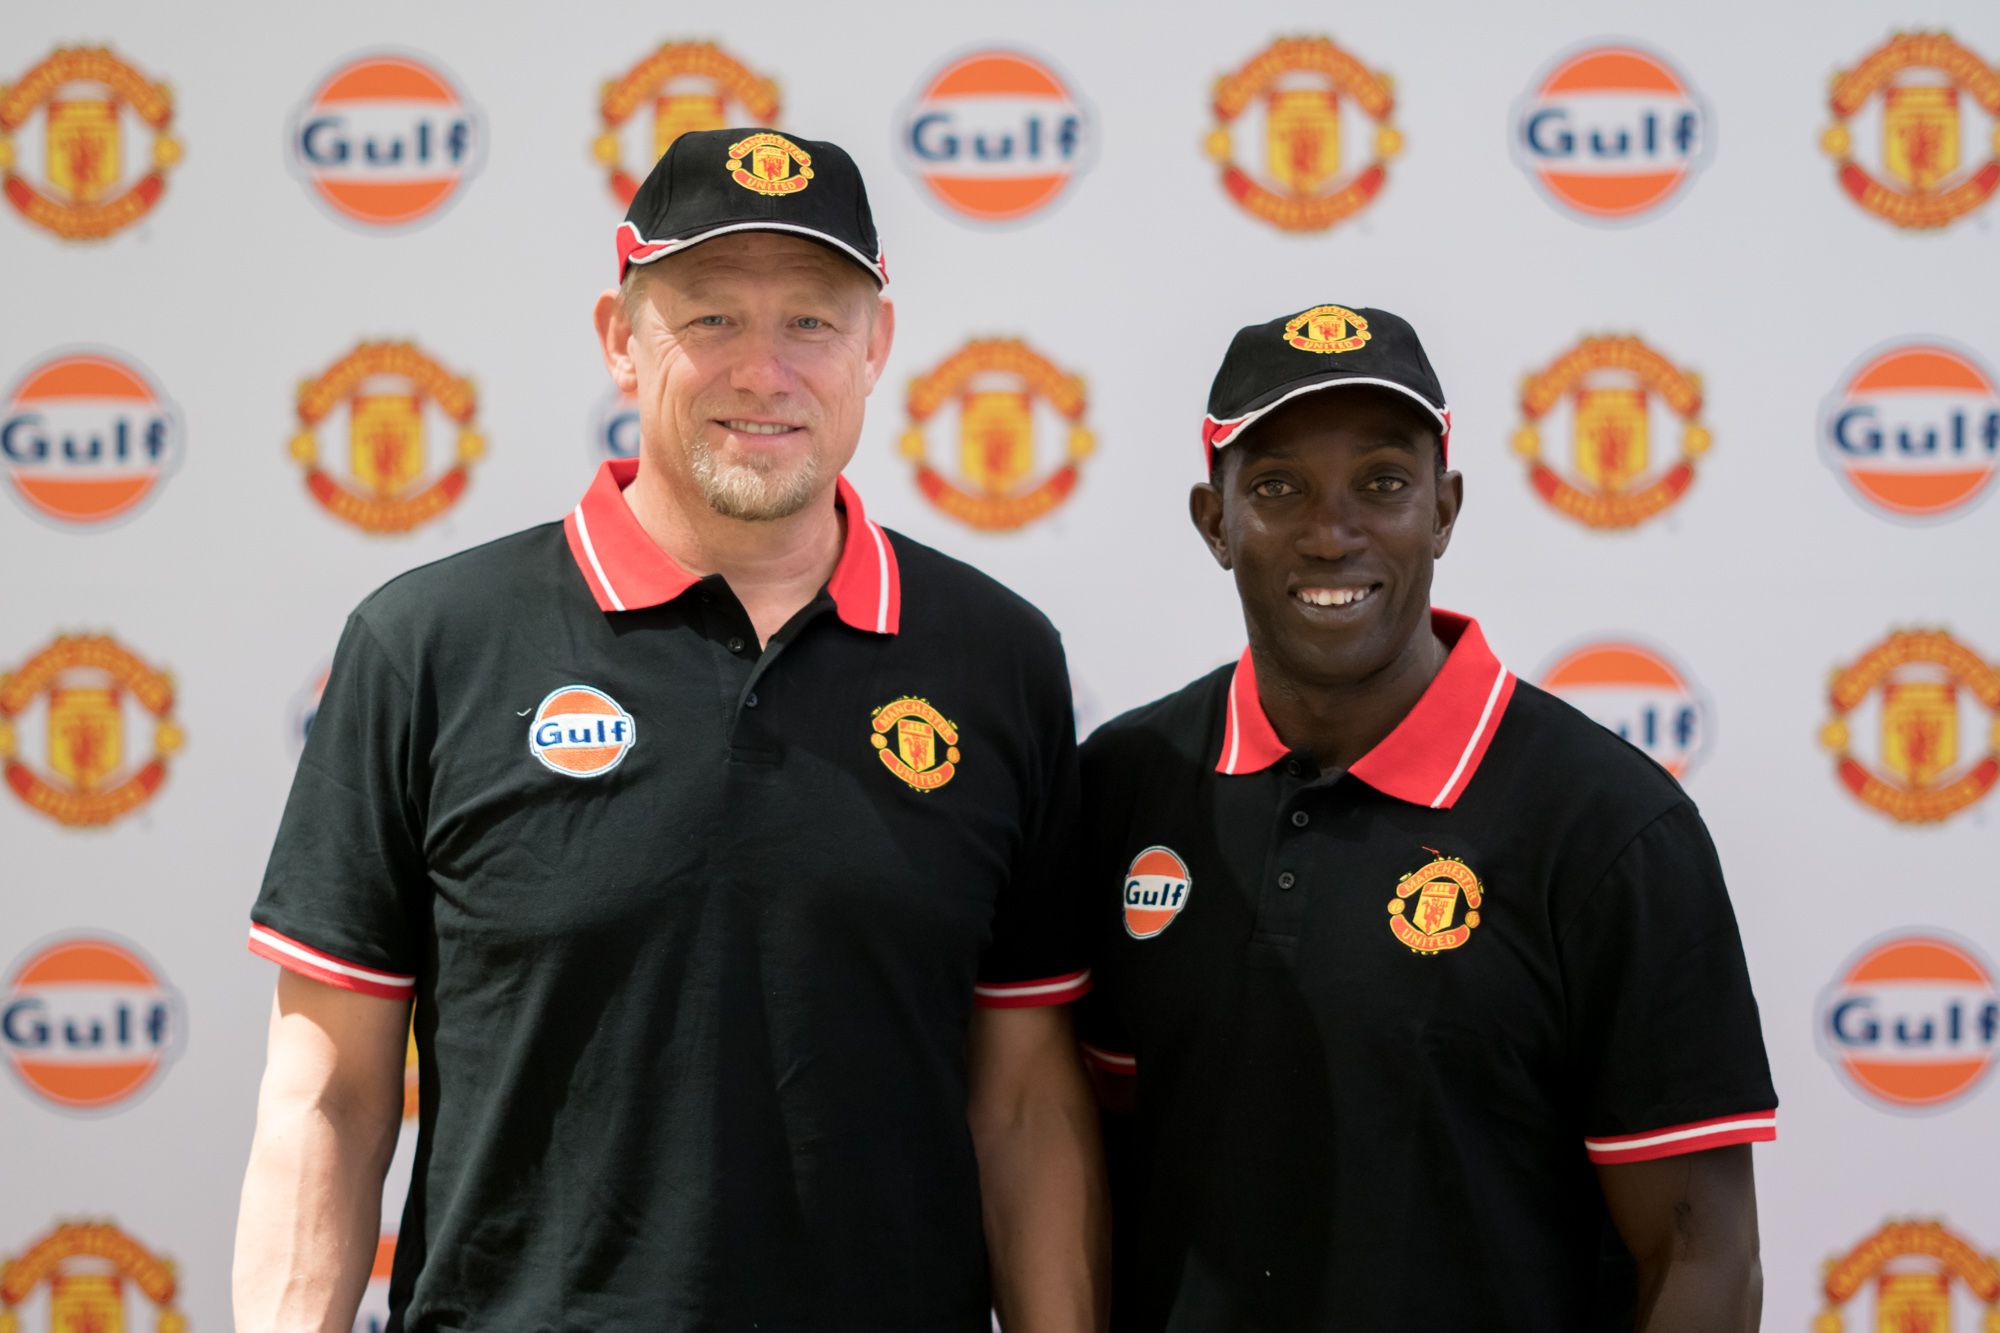 Gulf Oil ULE 5W-40 - Manchester United football legends Dwight Yorke and Peter Schmeichel unveil new lubricant in Dubai